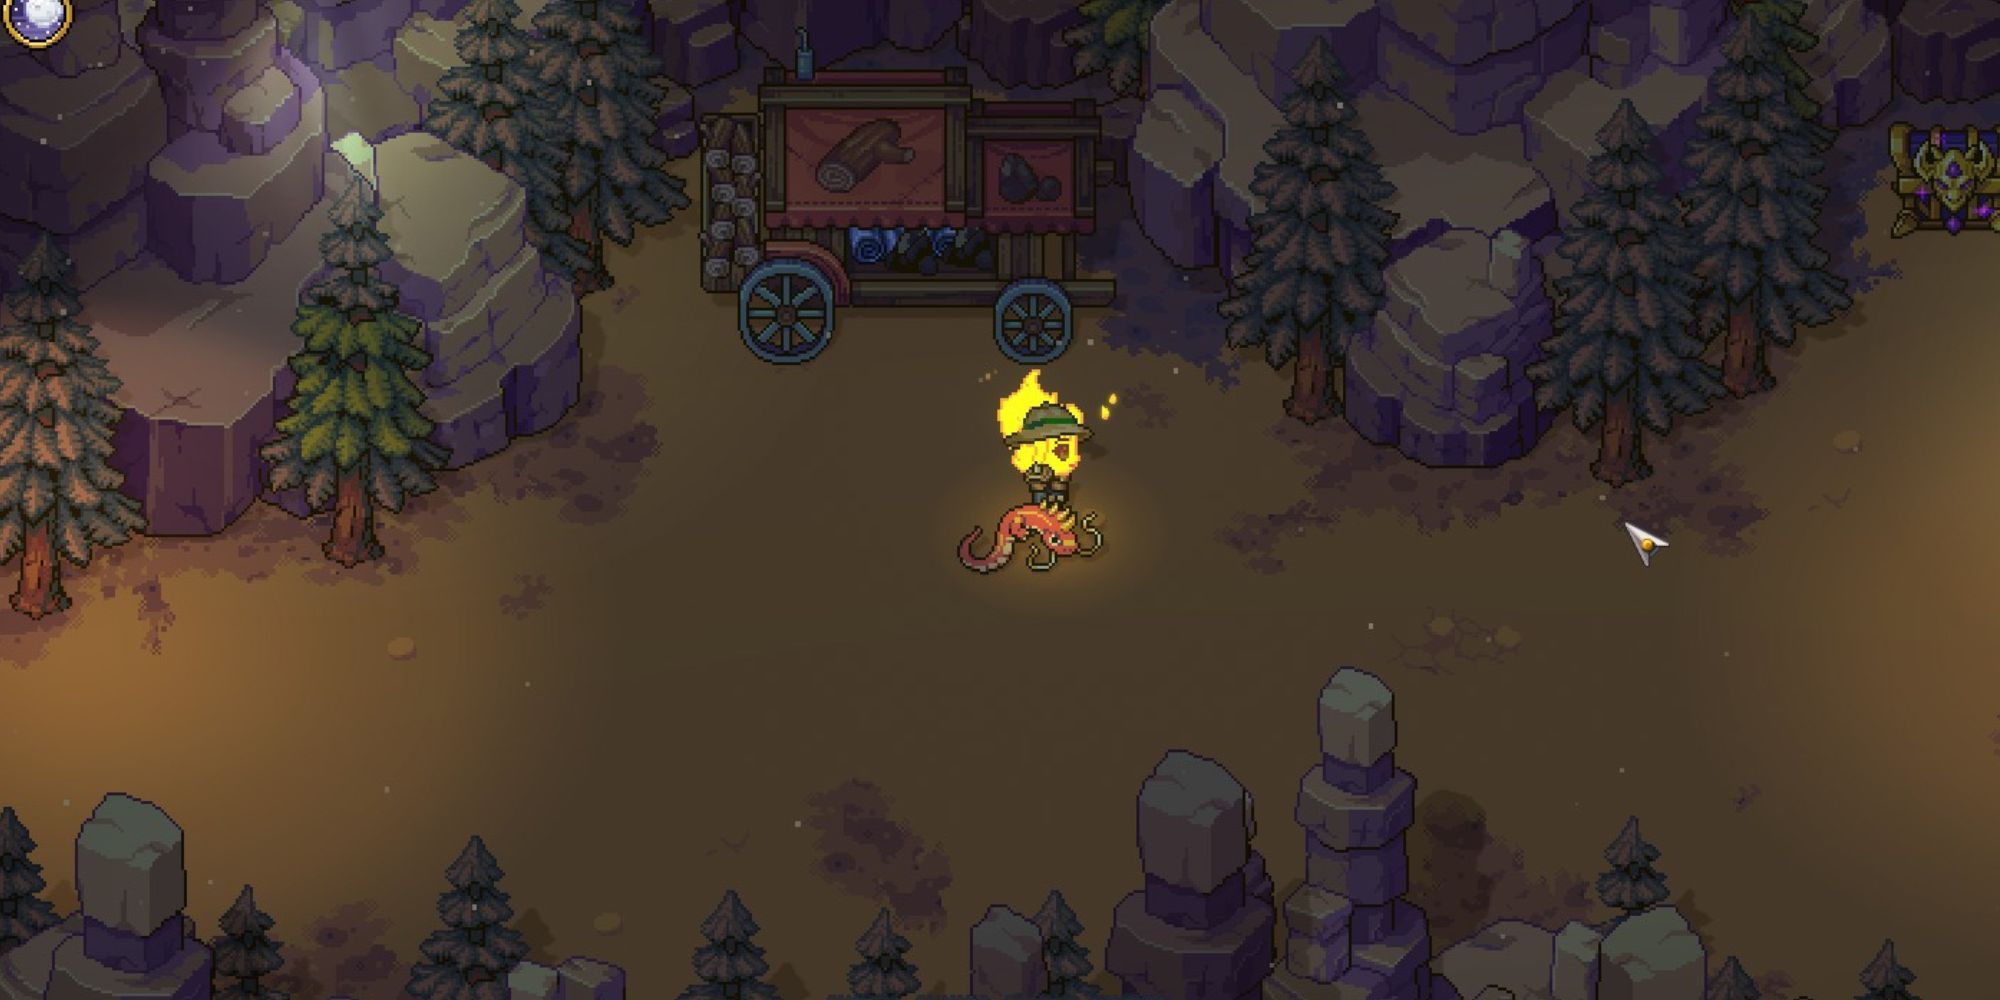 The Lantern Spirt follows the farmer closely as they walk outside the Sun Haven mines at night